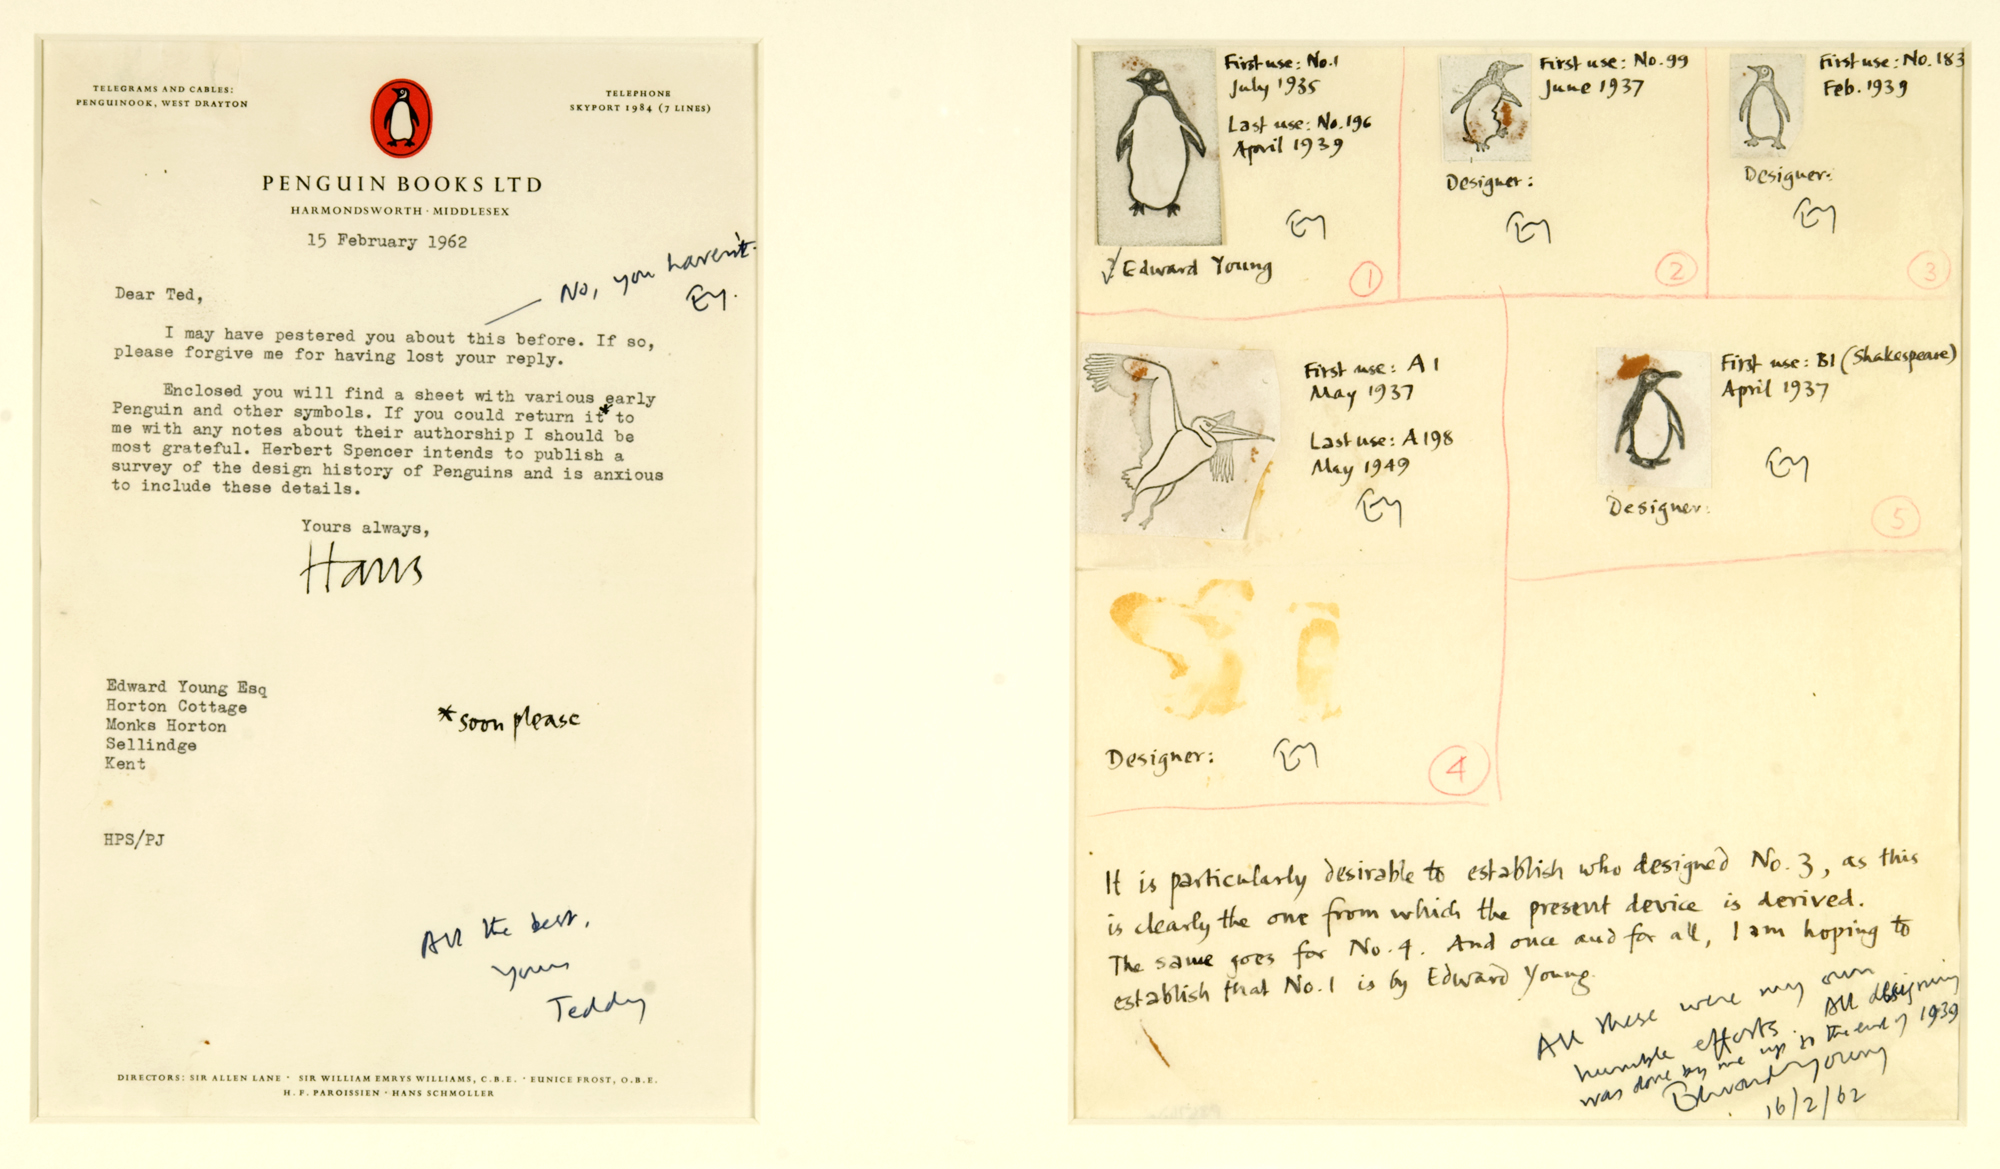 Images from the Penguin Archive of letters from 1962 between Hans Schmoller and Edward Young, where Young was being asked to identify who designed a number of logos.